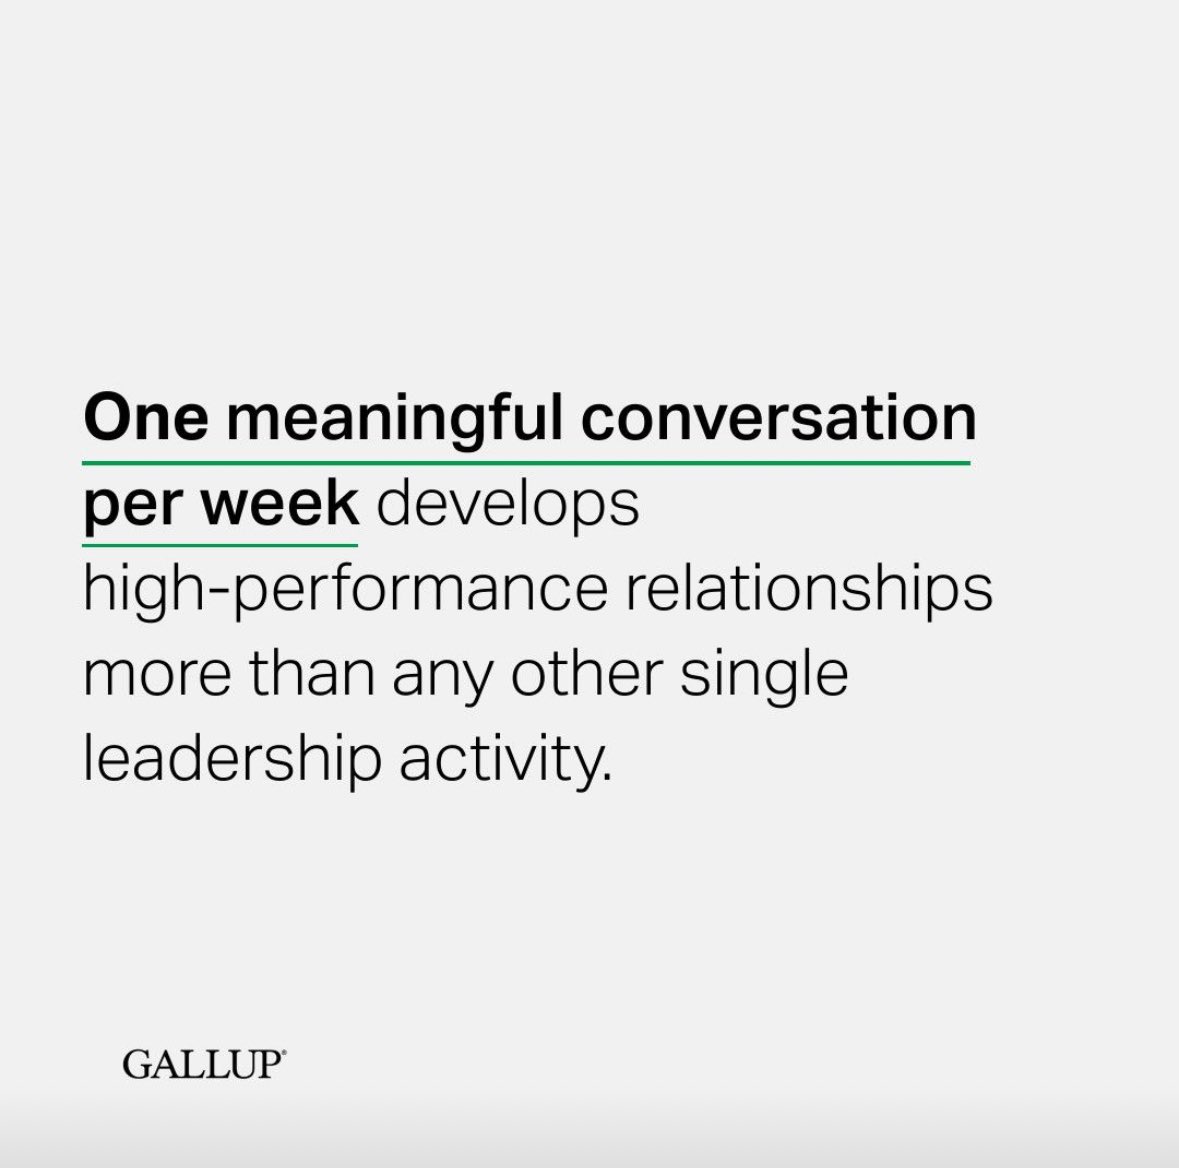 I love this from @Gallup and completely agree. In a recent leadership workshop we spent a significant amount of time discussing this and thinking of ways we could bring it to life in our busy and pressured workplace.